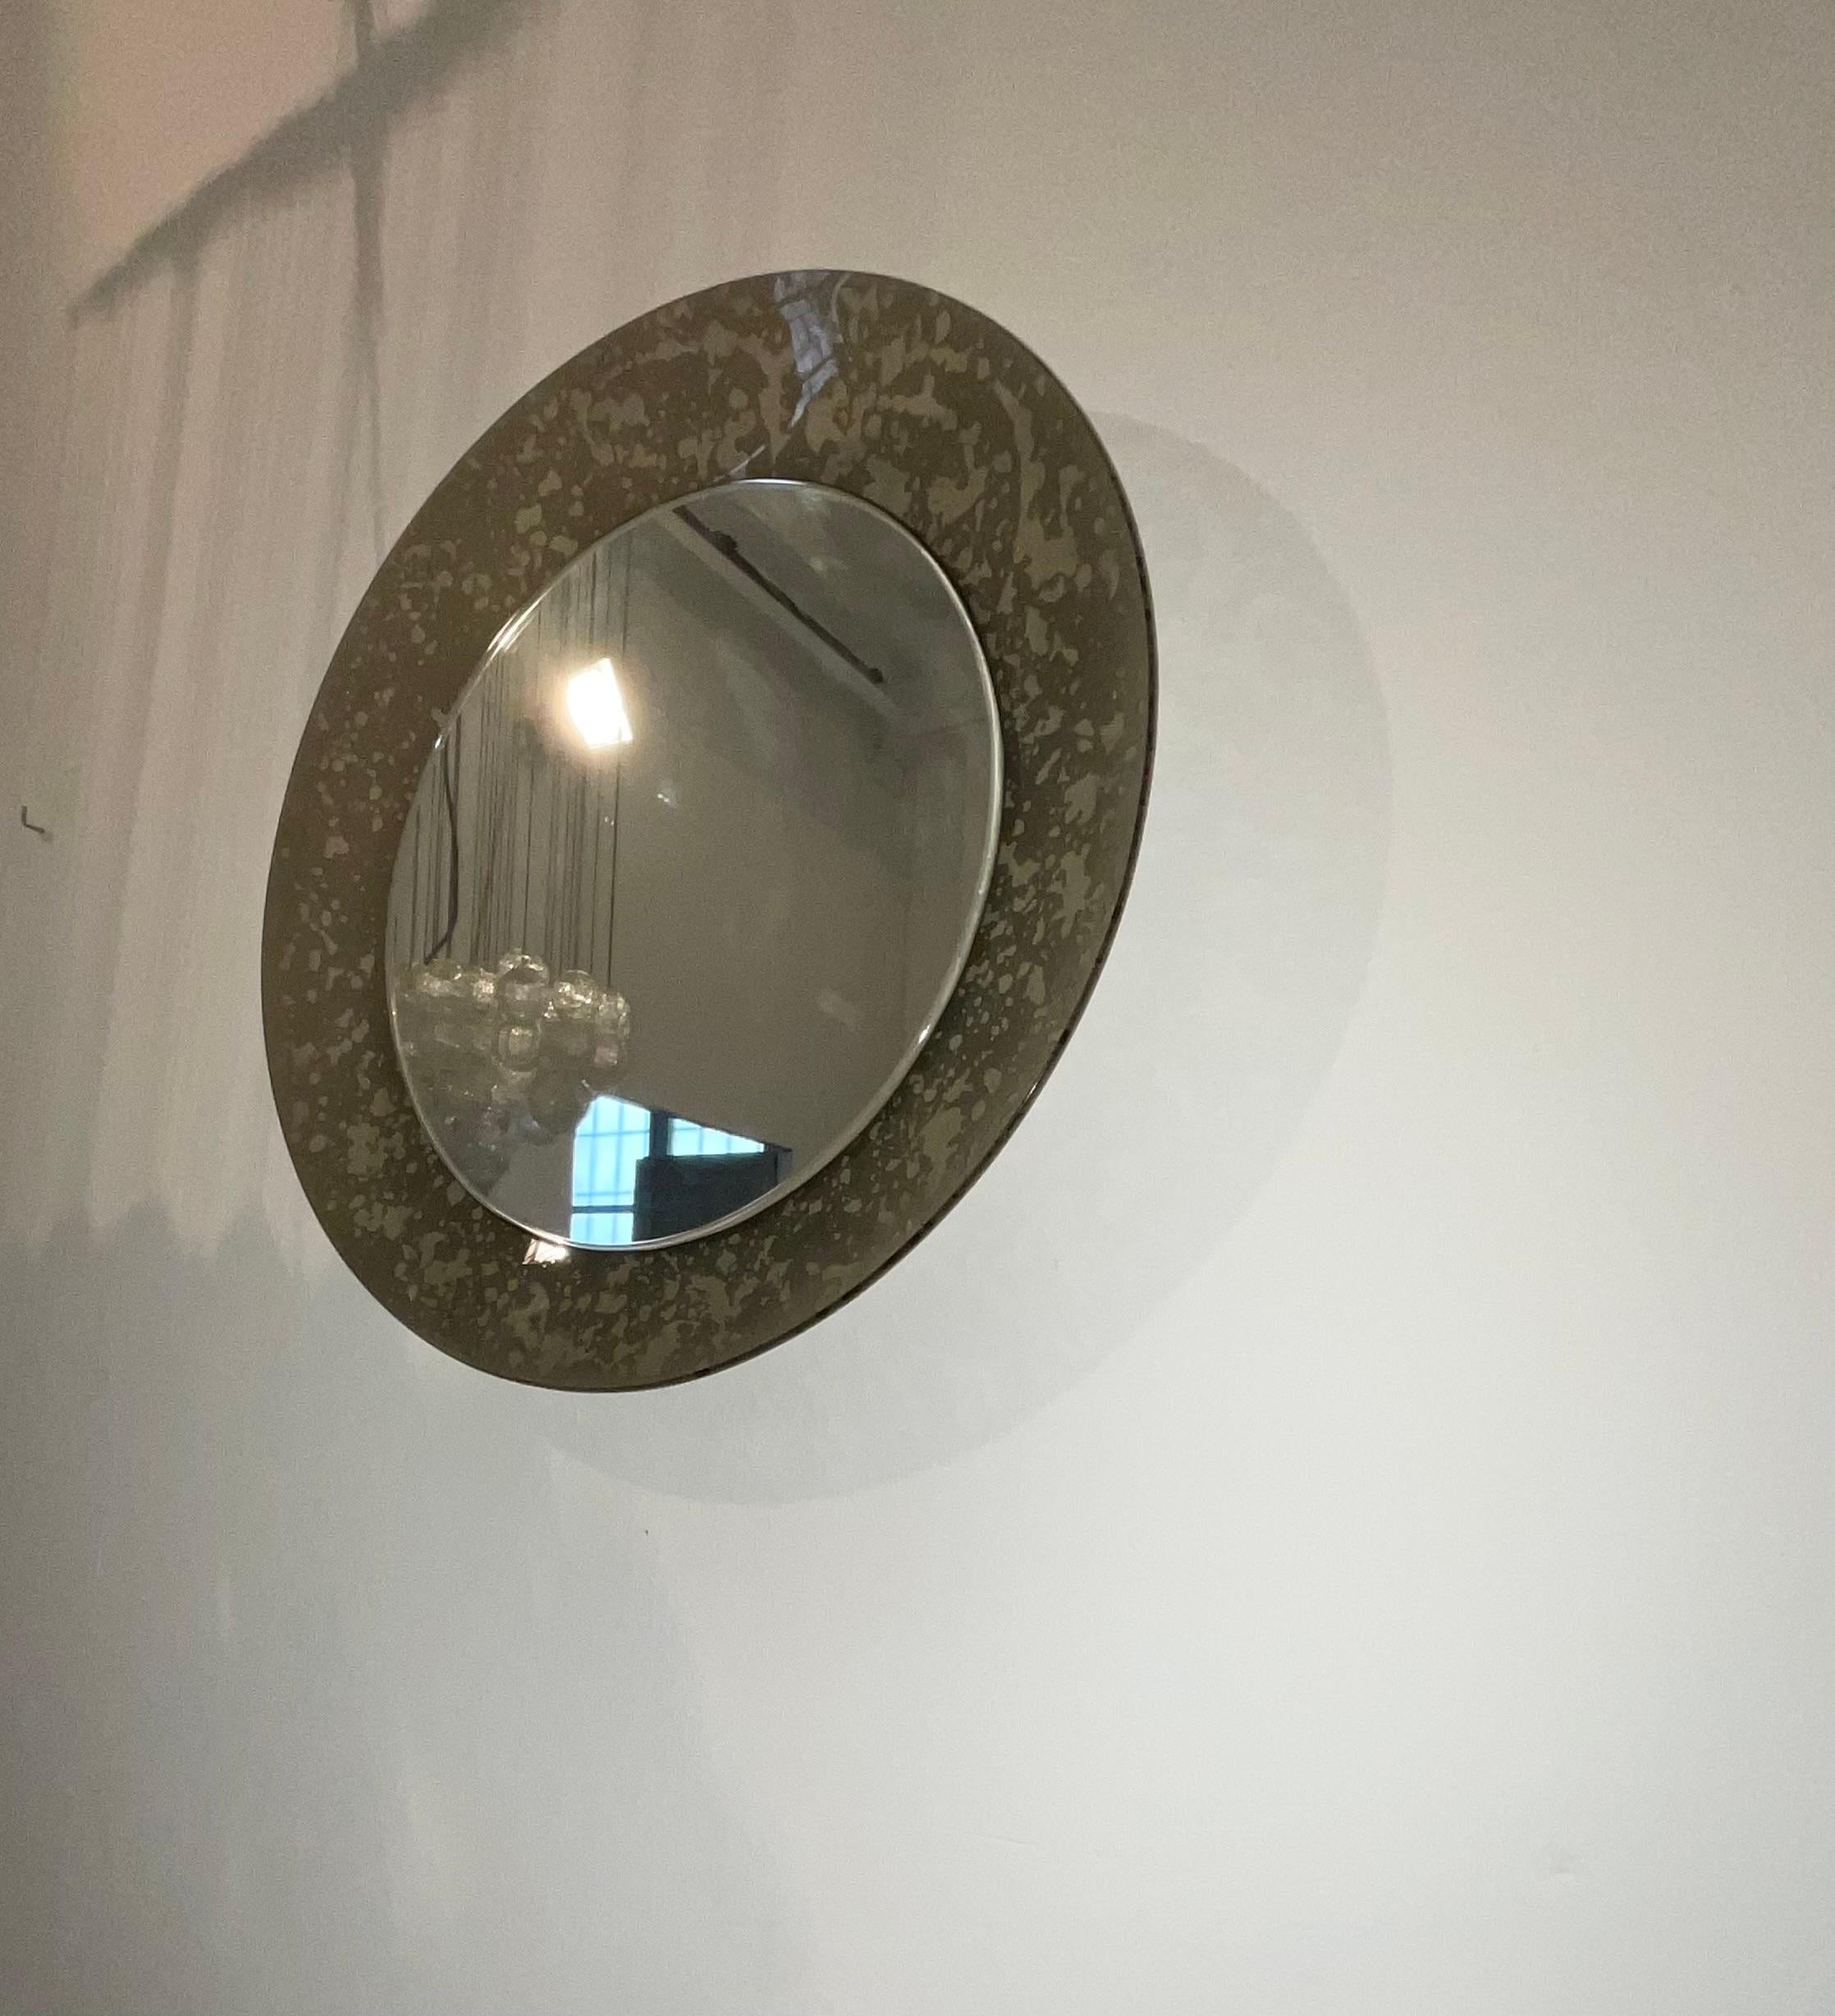 FONTANARTE - Erwing BURGER - Hanging mirror - curved and etched glass. For Sale 3